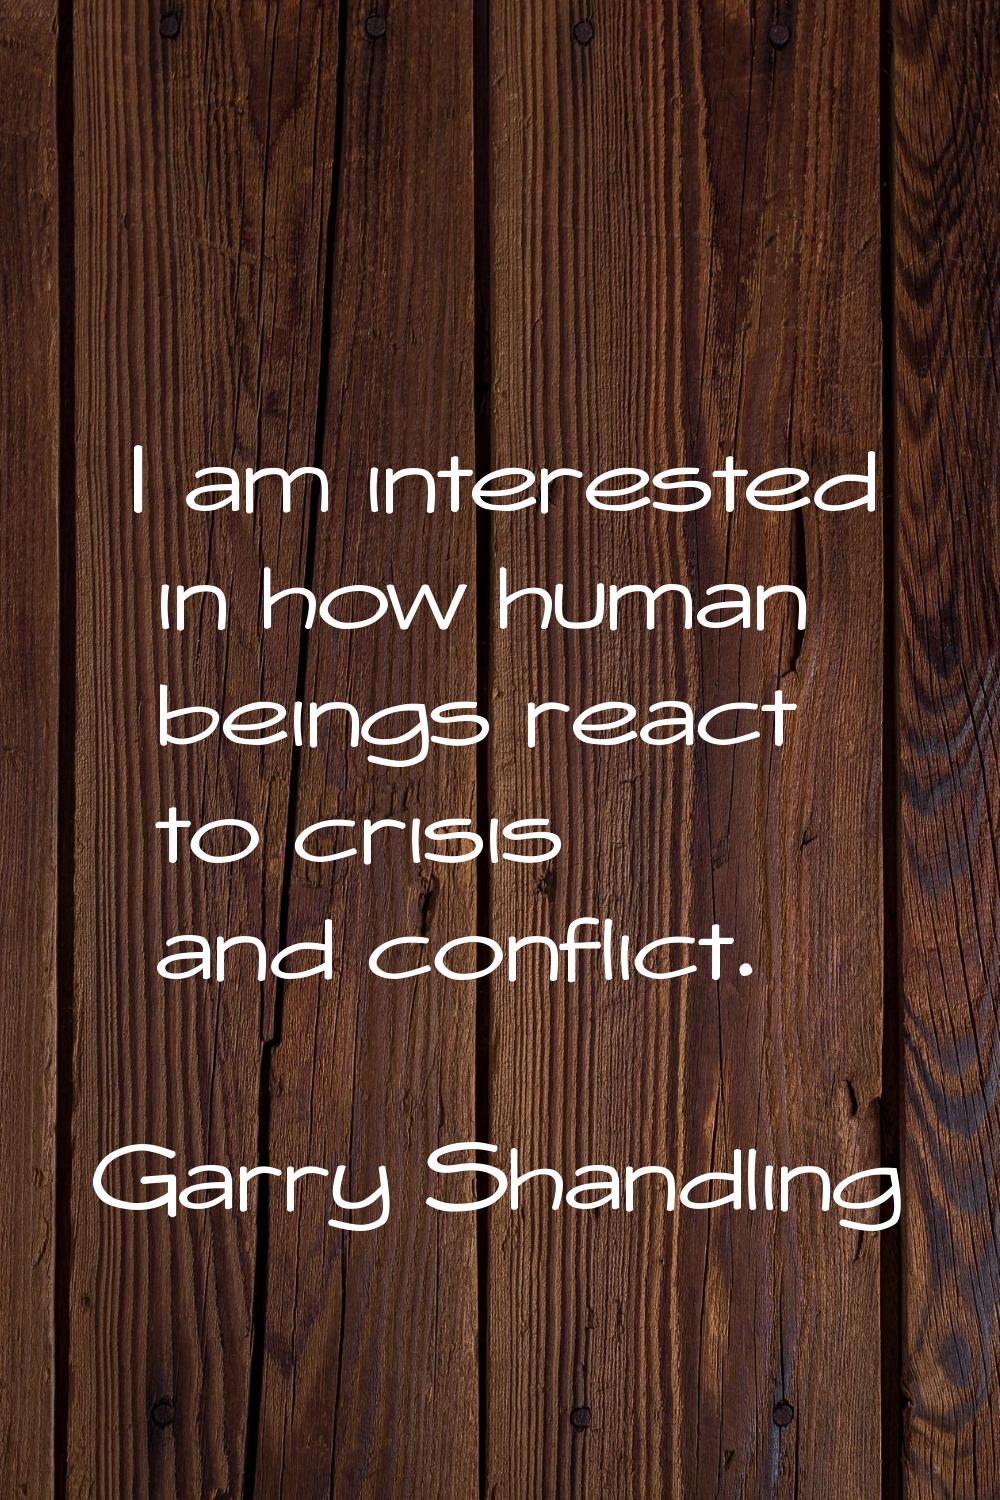 I am interested in how human beings react to crisis and conflict.